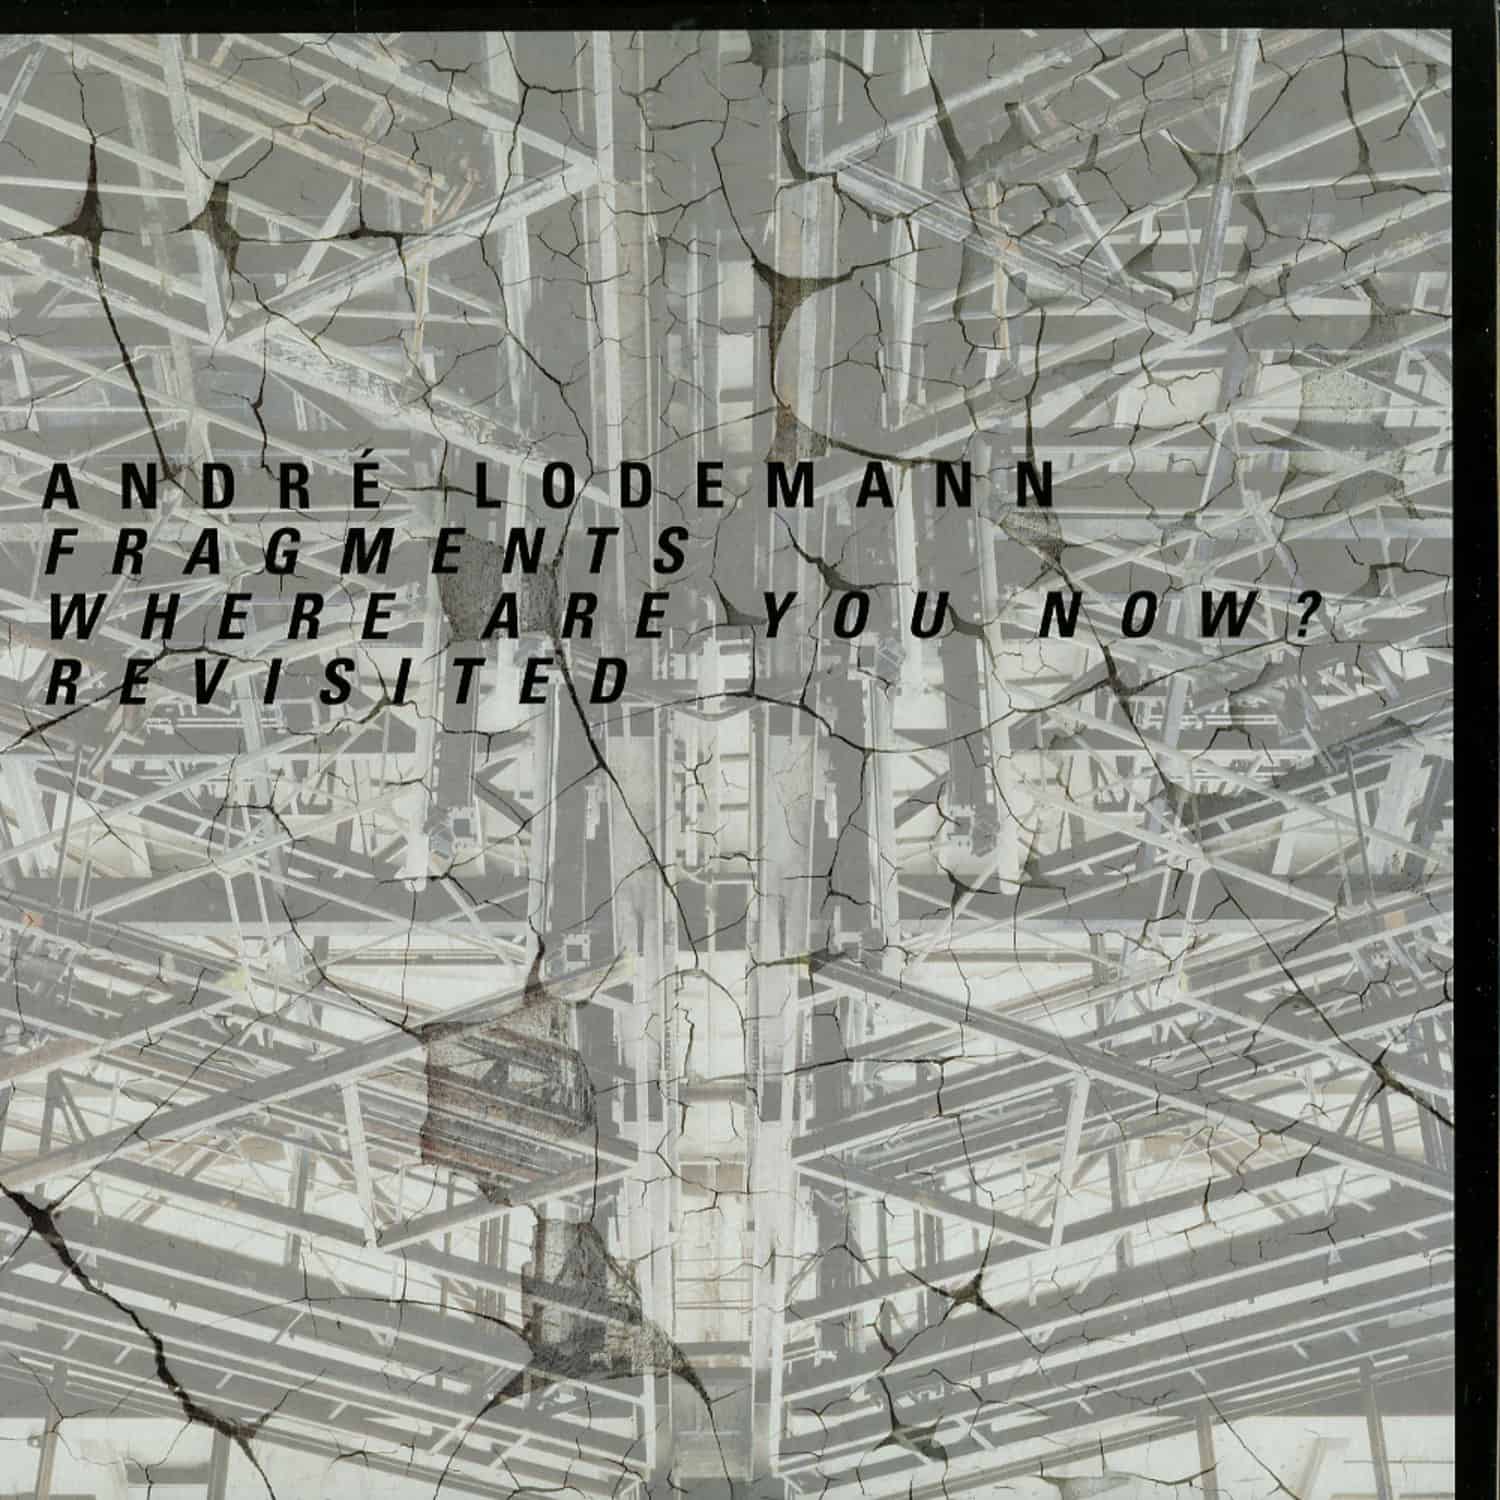 Andre Lodemann - FRAGMENTS - WHERE ARE YOU NOW? 